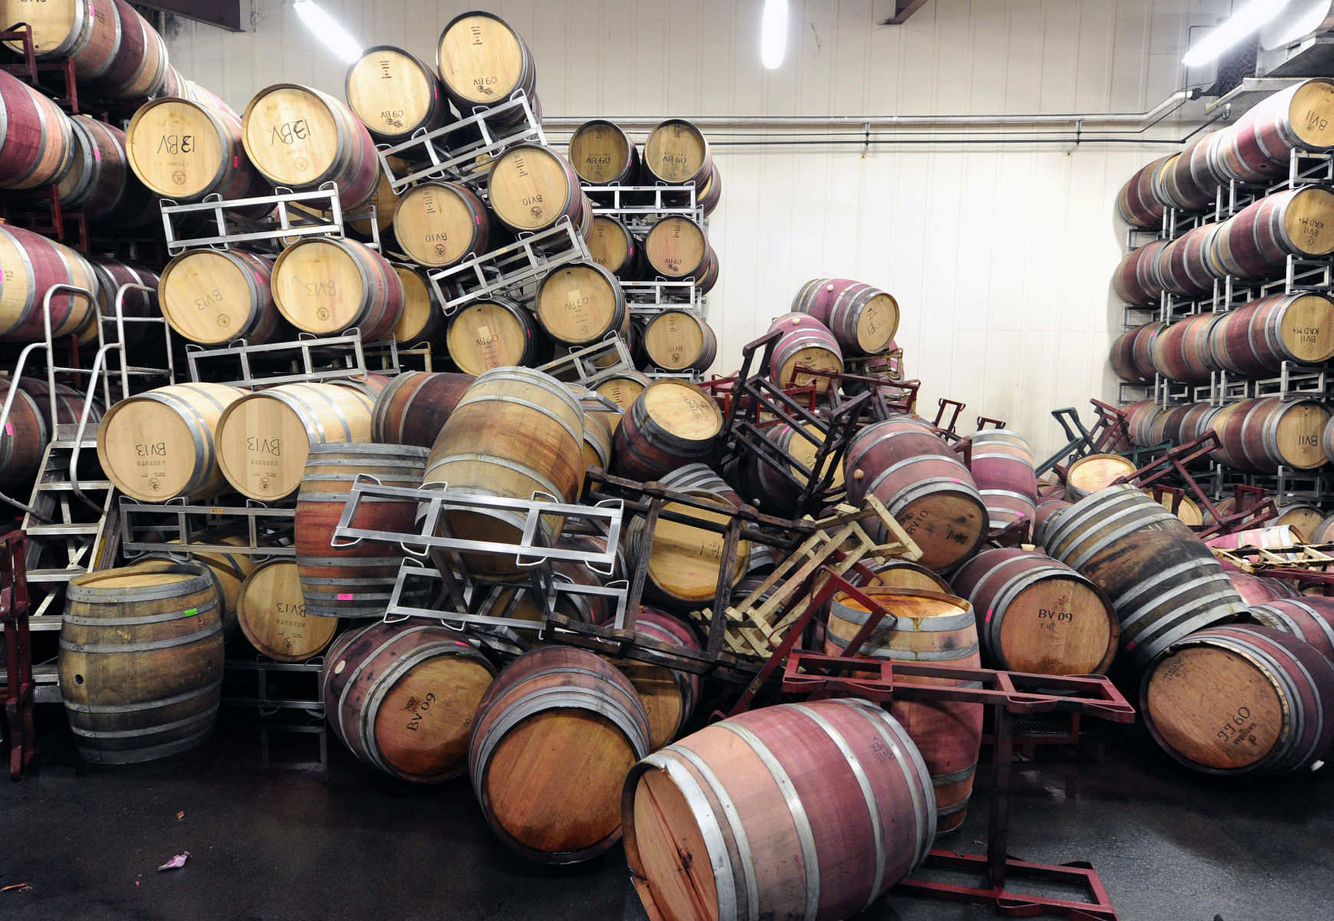 EARTHQUAKE: Barrels are strewn about at a winery in Napa, California after a 6.1 Earthquake struck the area.